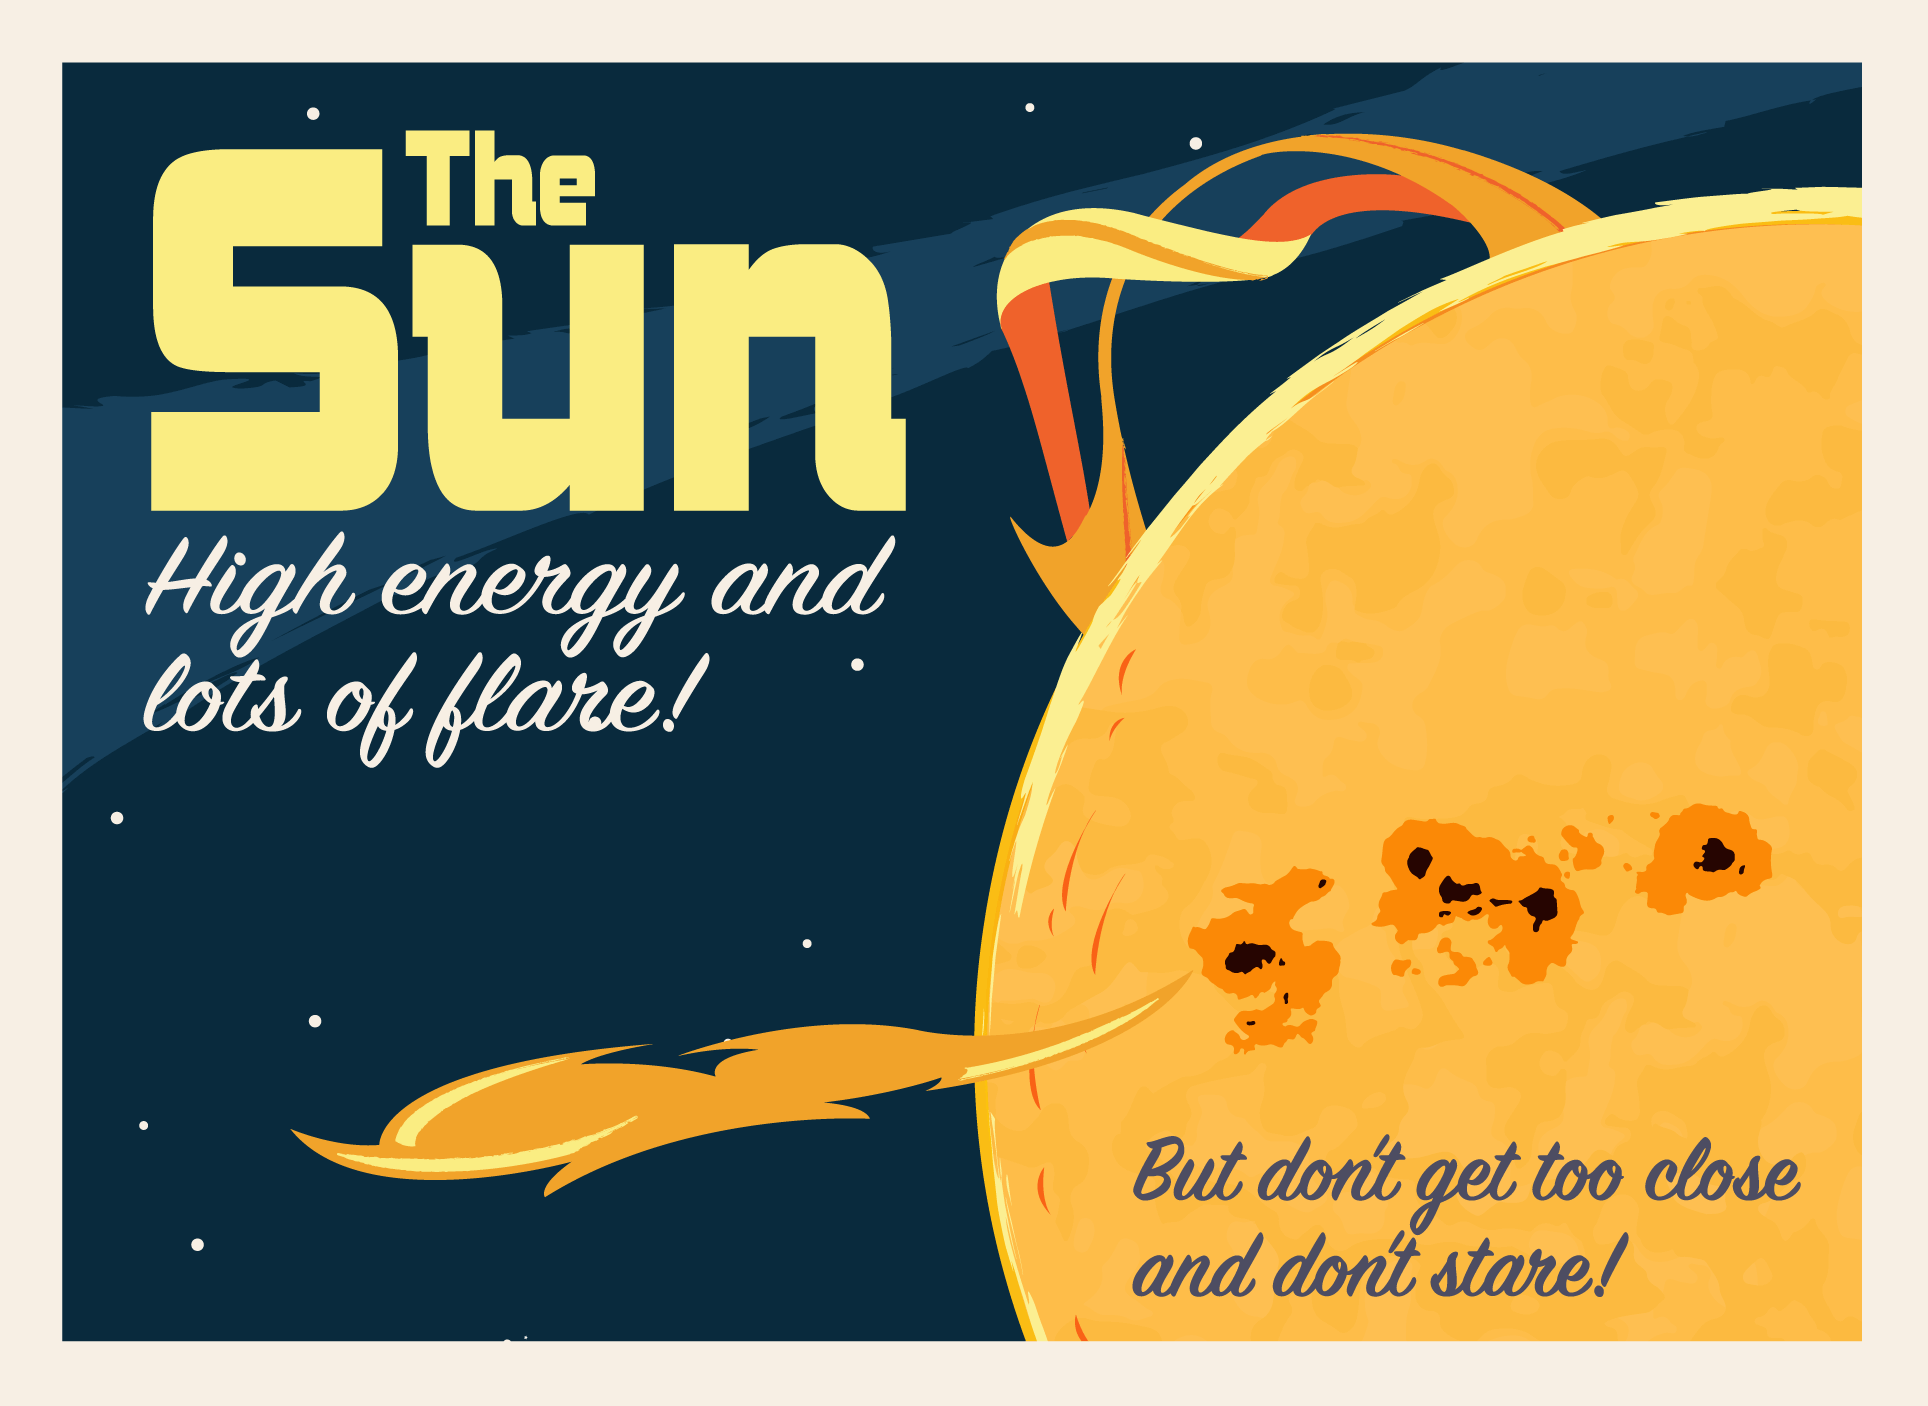 20 Brilliant Facts About the Sun